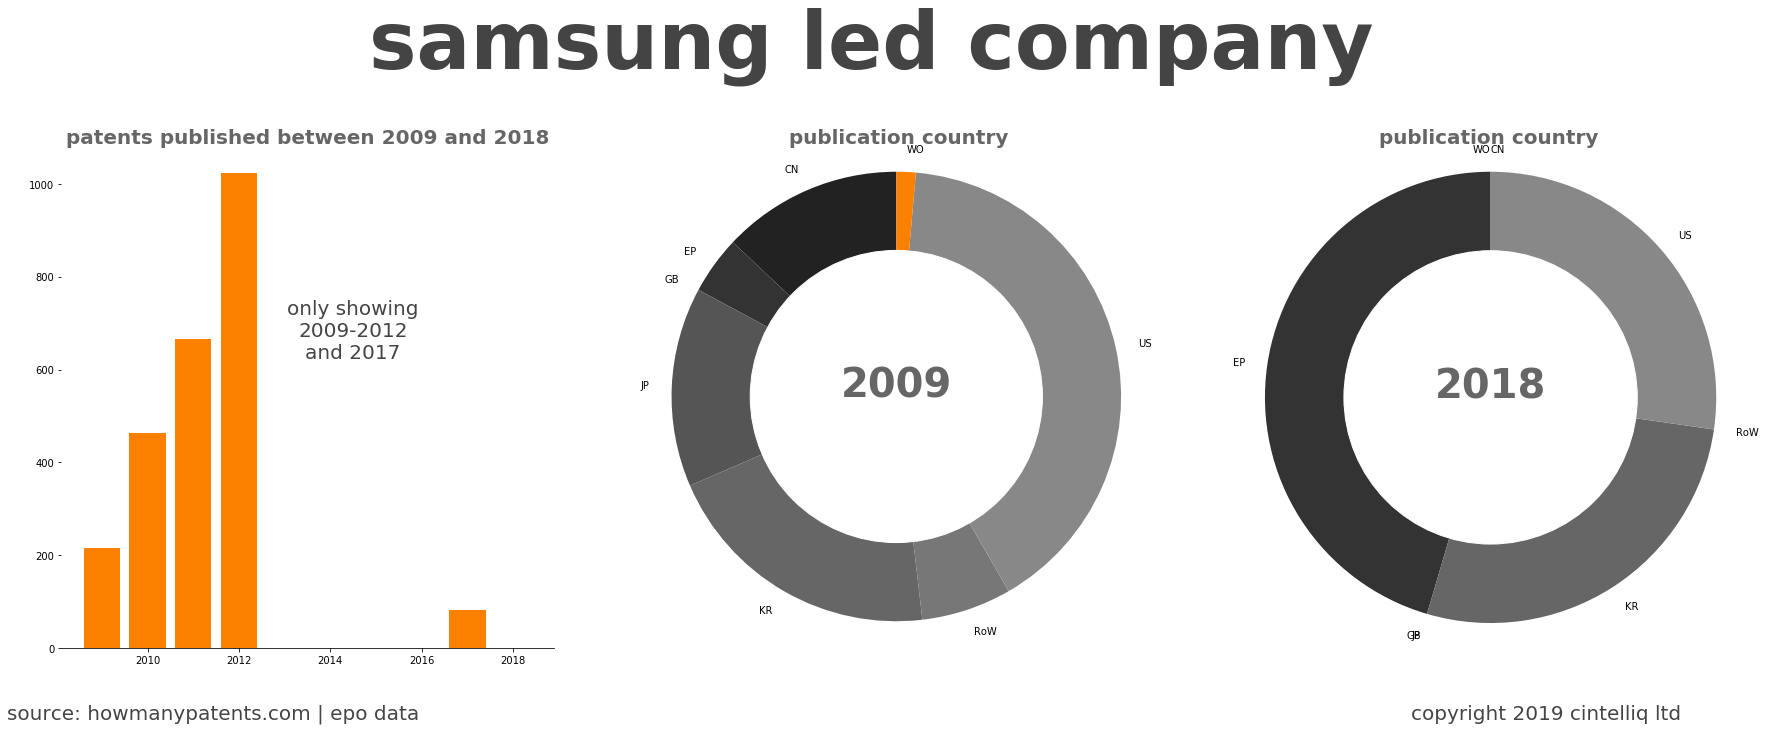 summary of patents for Samsung Led Company